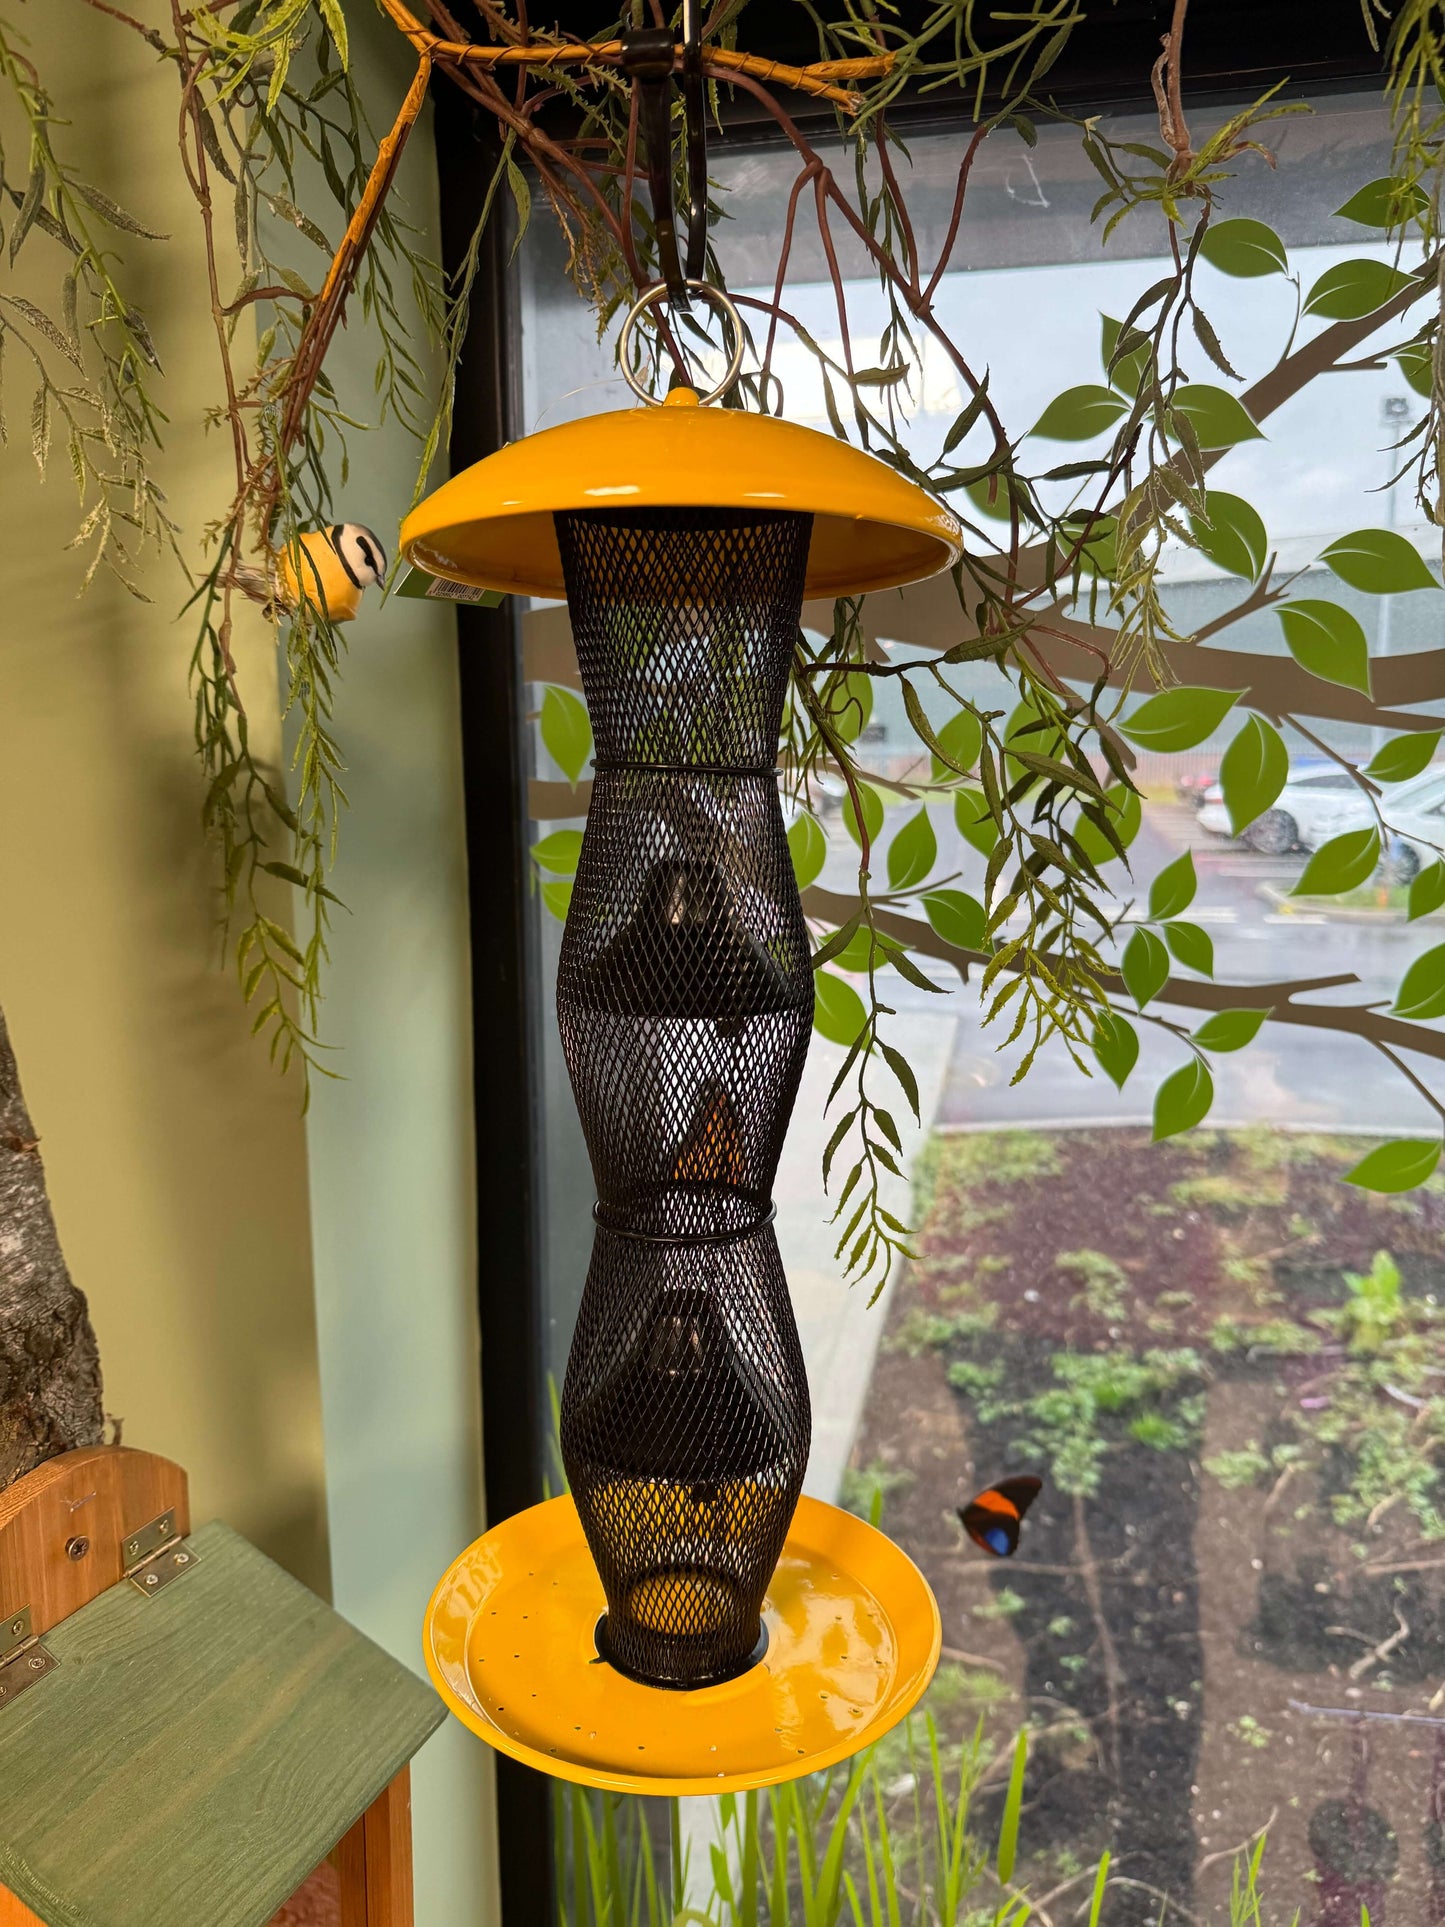 Yellow niger seed feeder with black mesh and built in seed baffles.